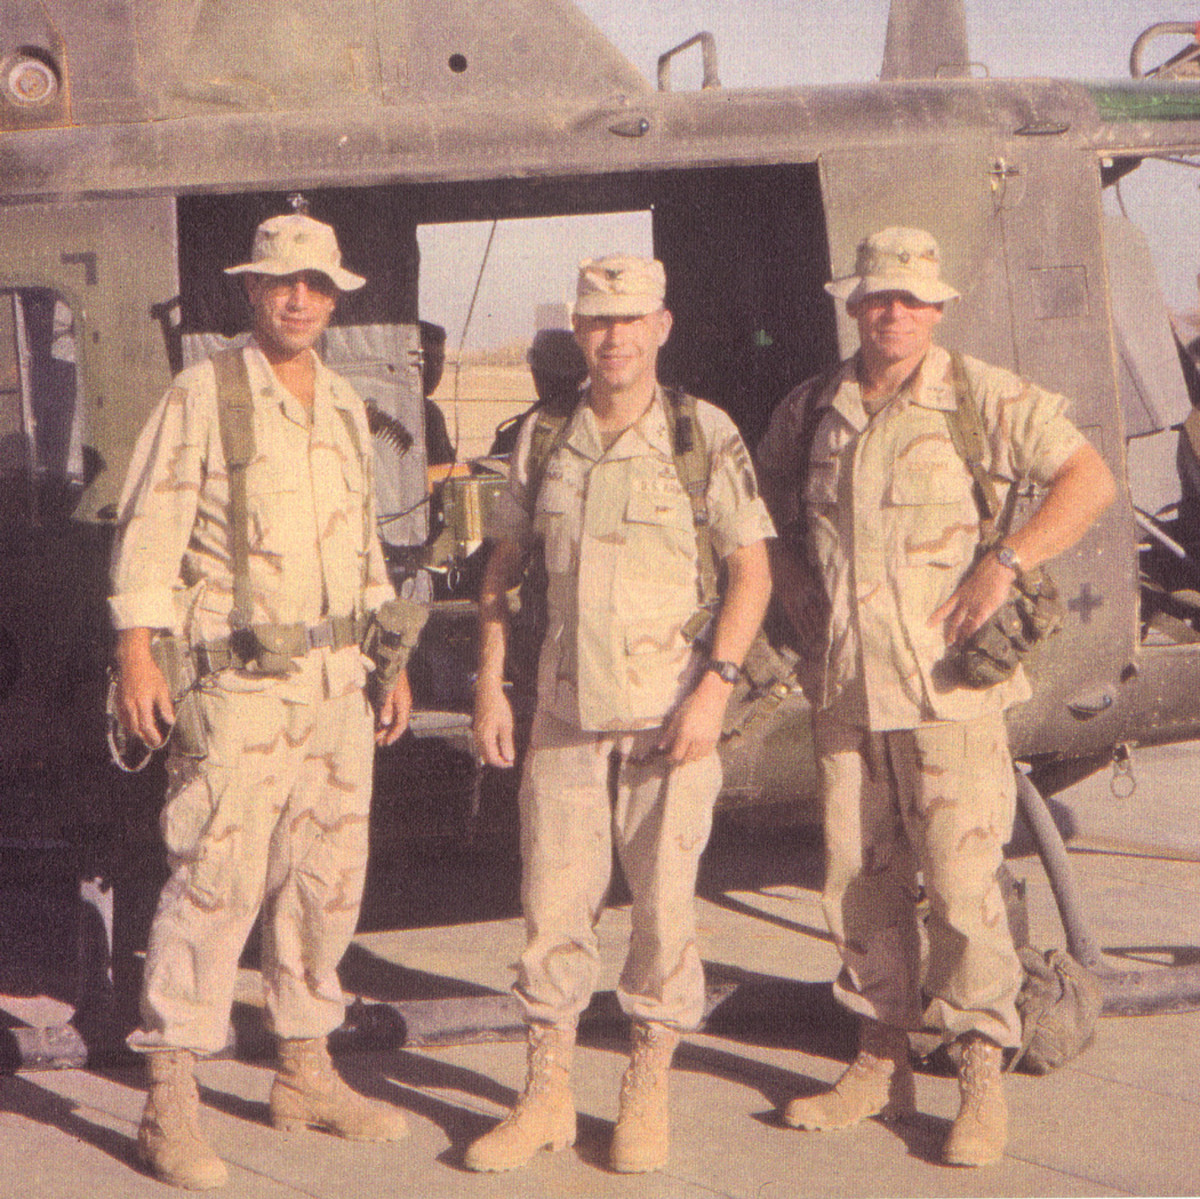 The author in Somalia – this deployment precluded a further staff ride to El Alamein. (Photo Courtesy Al Barnes and Kevin Born from “Desert Uniforms, Patches, and Insignia of the US Armed Forces.”